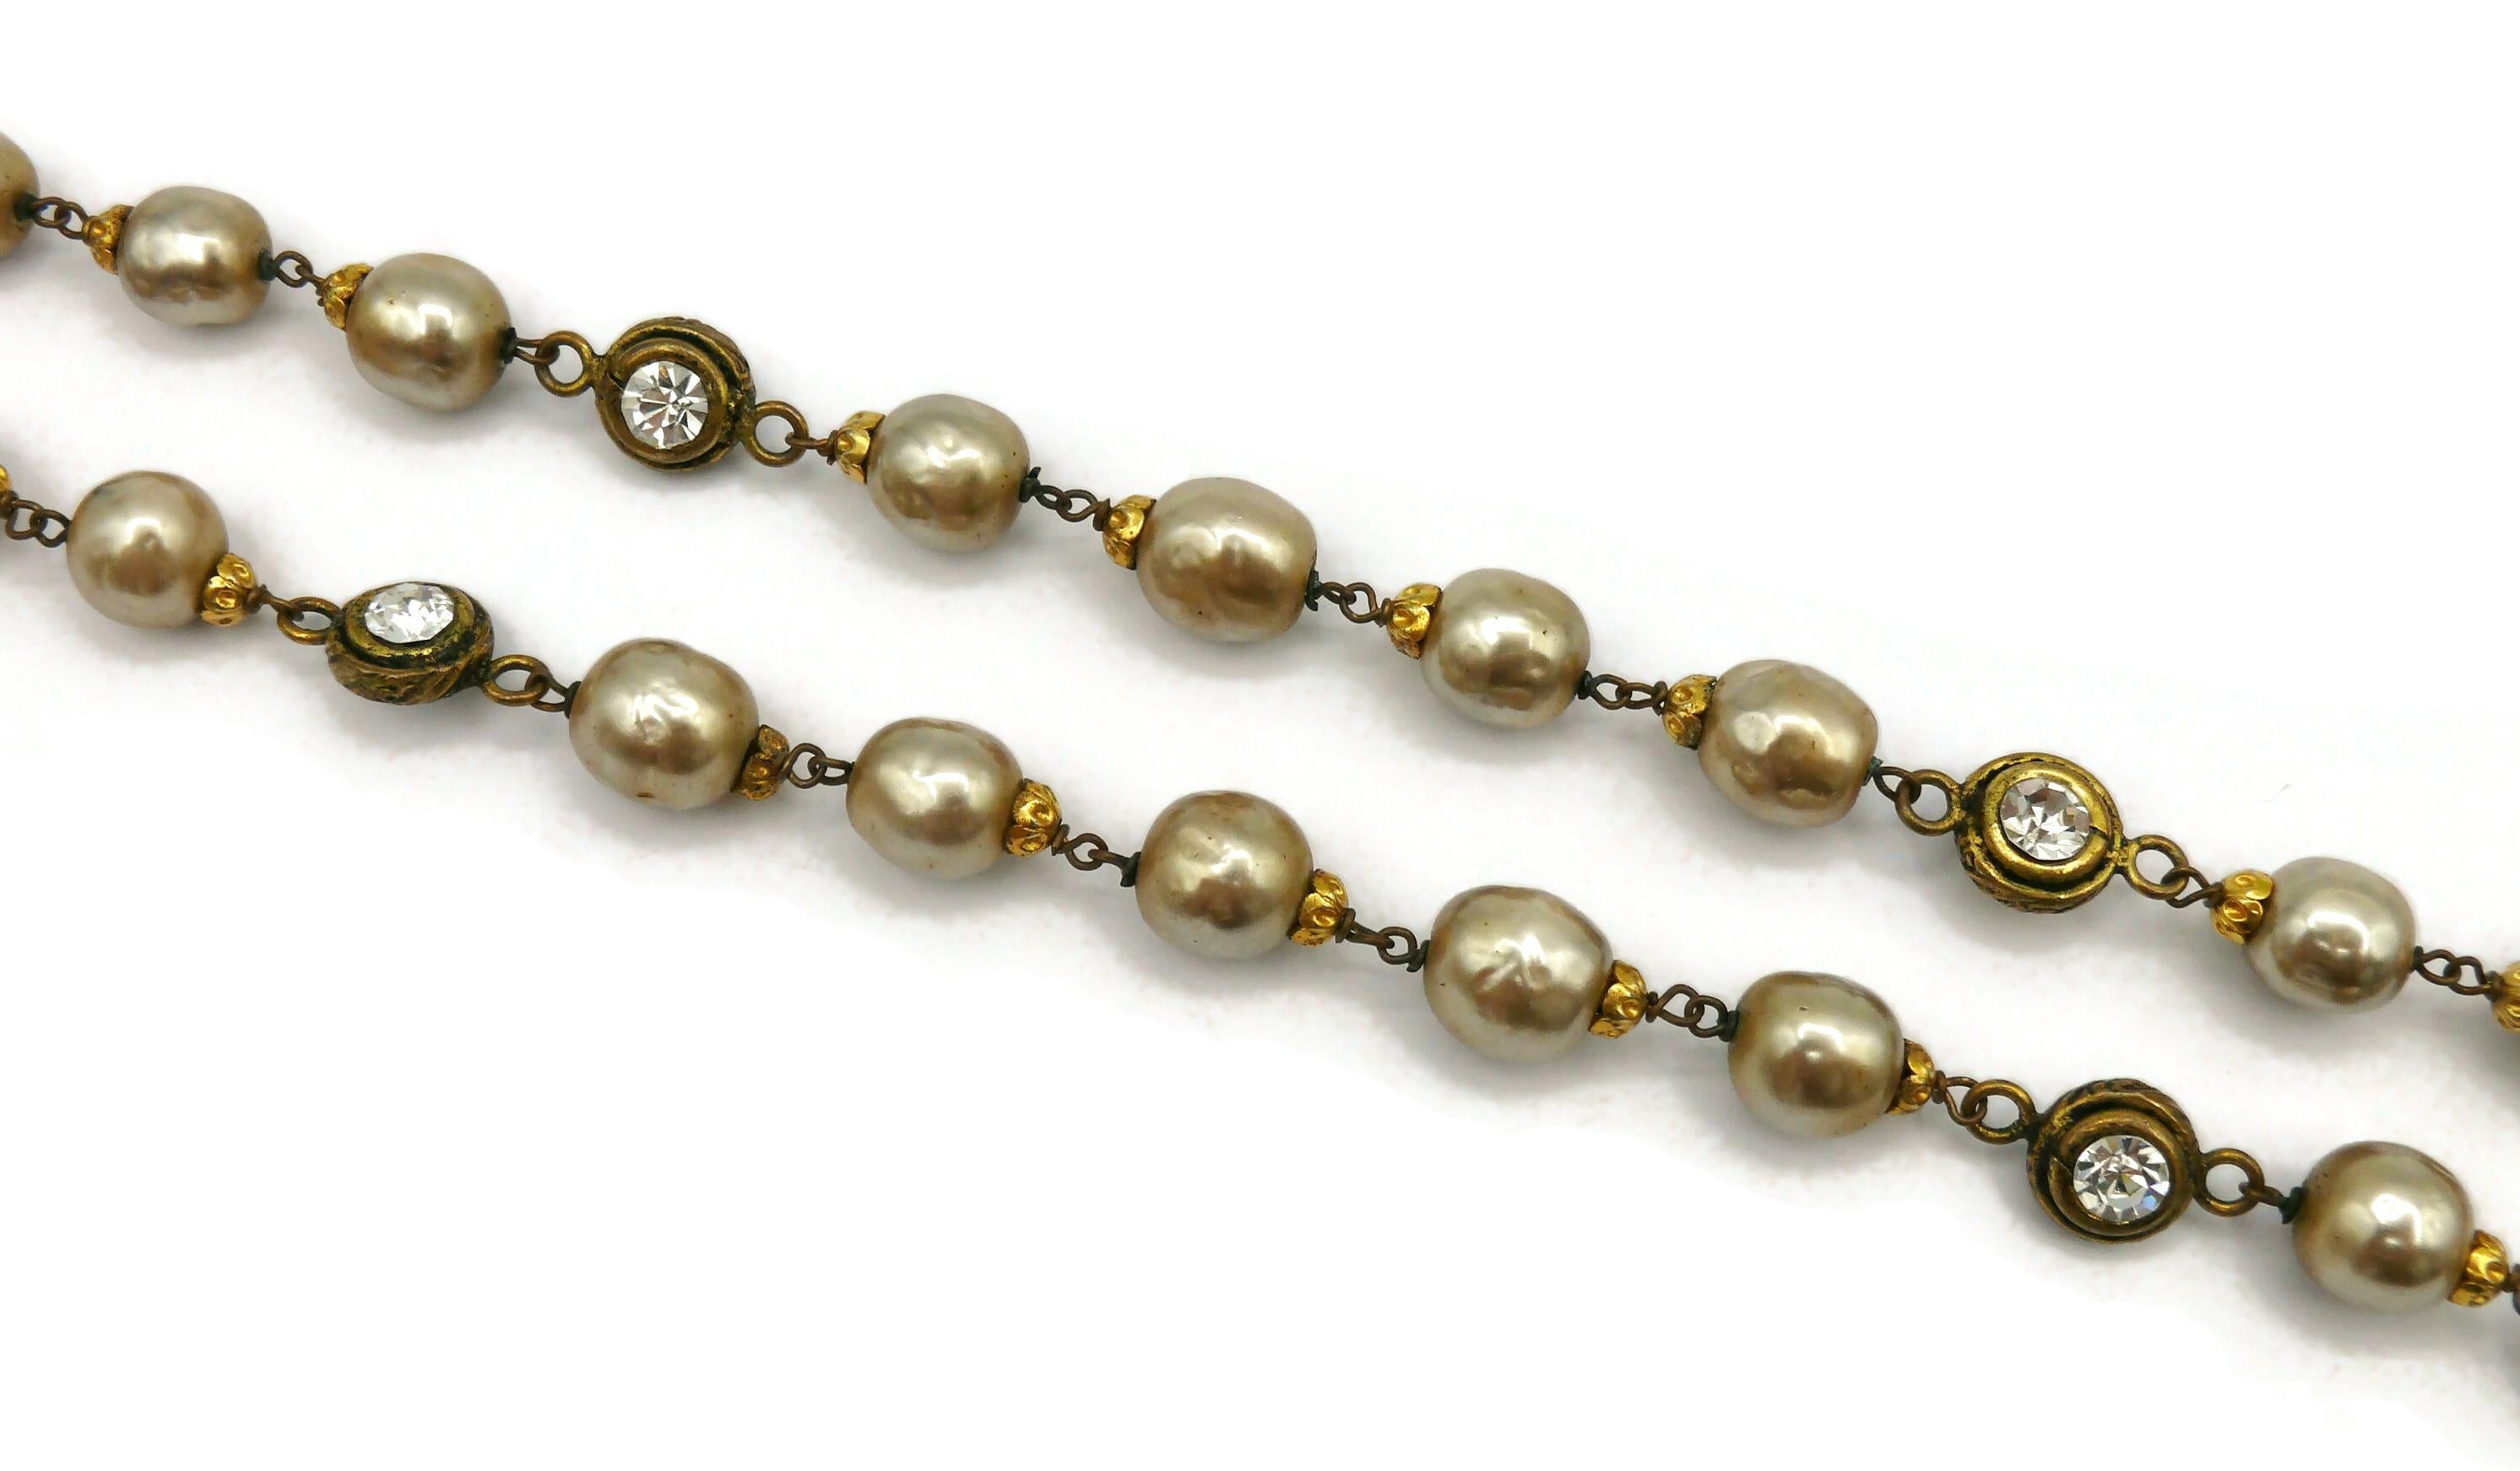 CHANEL Vintage Pearl & Crystal Sautoir Necklace, 1983 For Sale 4